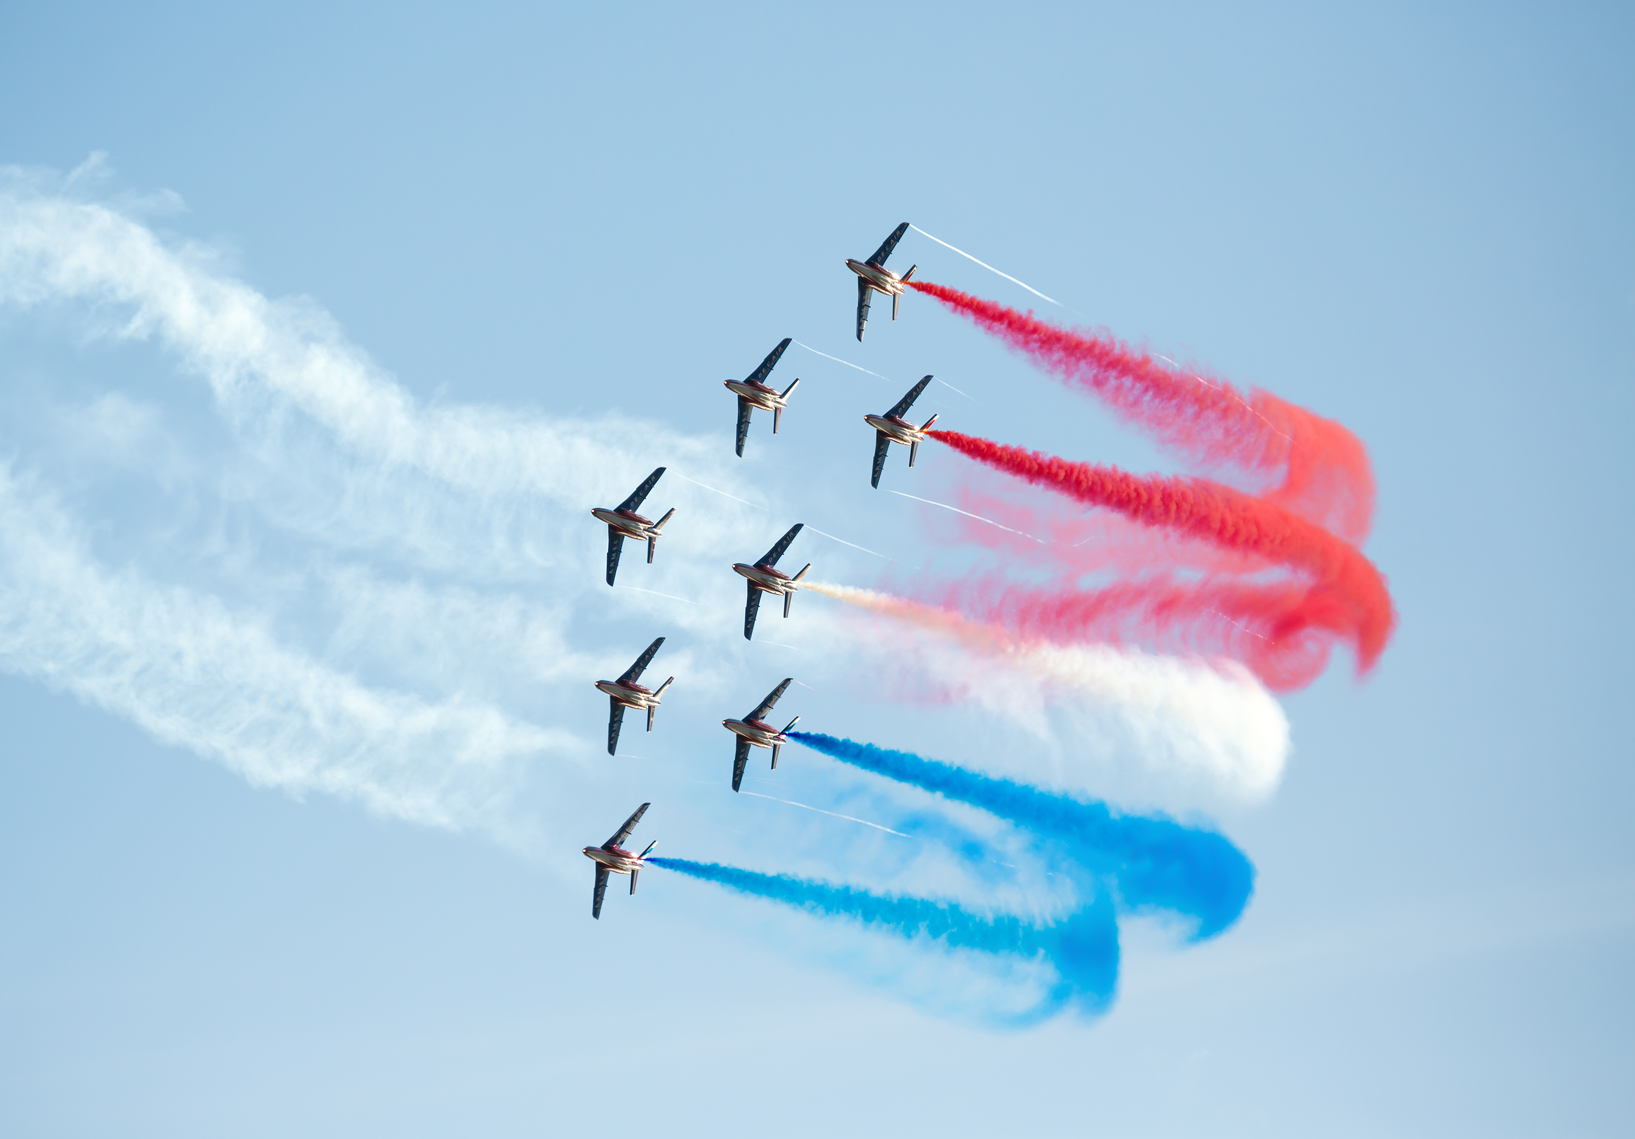 Join Extrude Hone at the 53rd International Paris Airshow! Extrude Hone